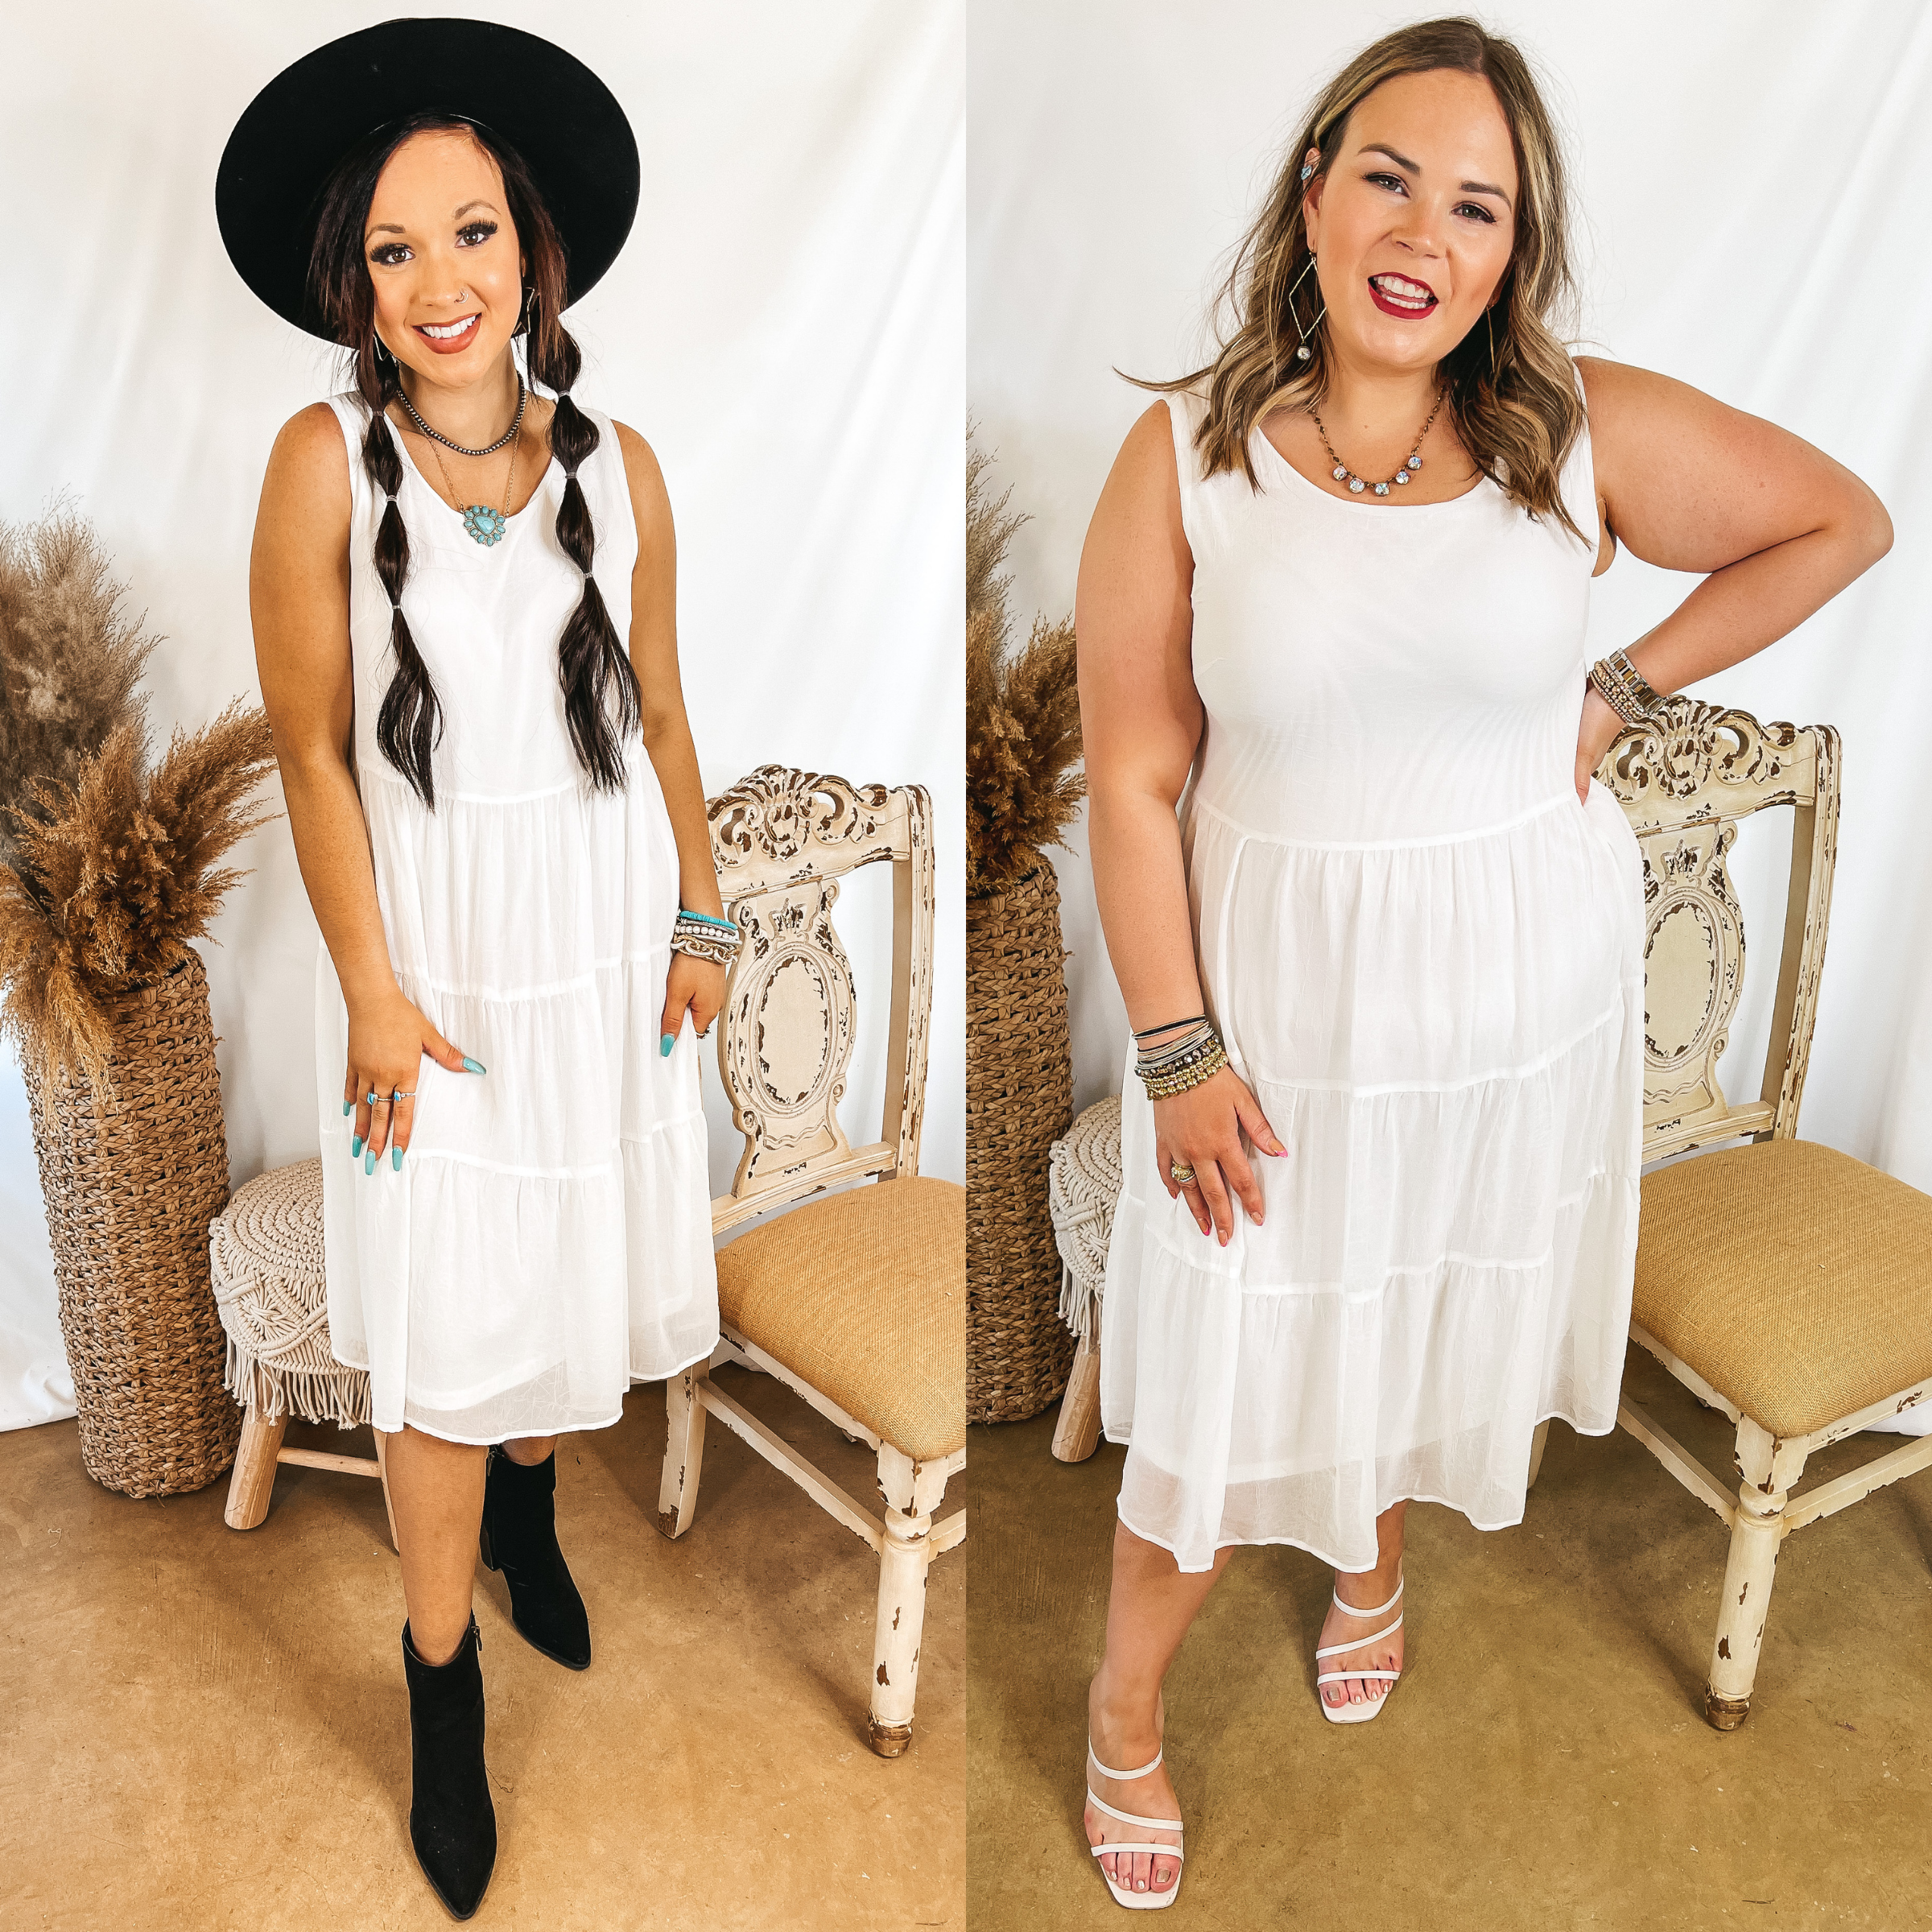 Models are wearing a white tank dress that is tiered. Size small model has it paired with a black hat and black booties. Size large model has it paired with white strappy heels and crystal jewelry.